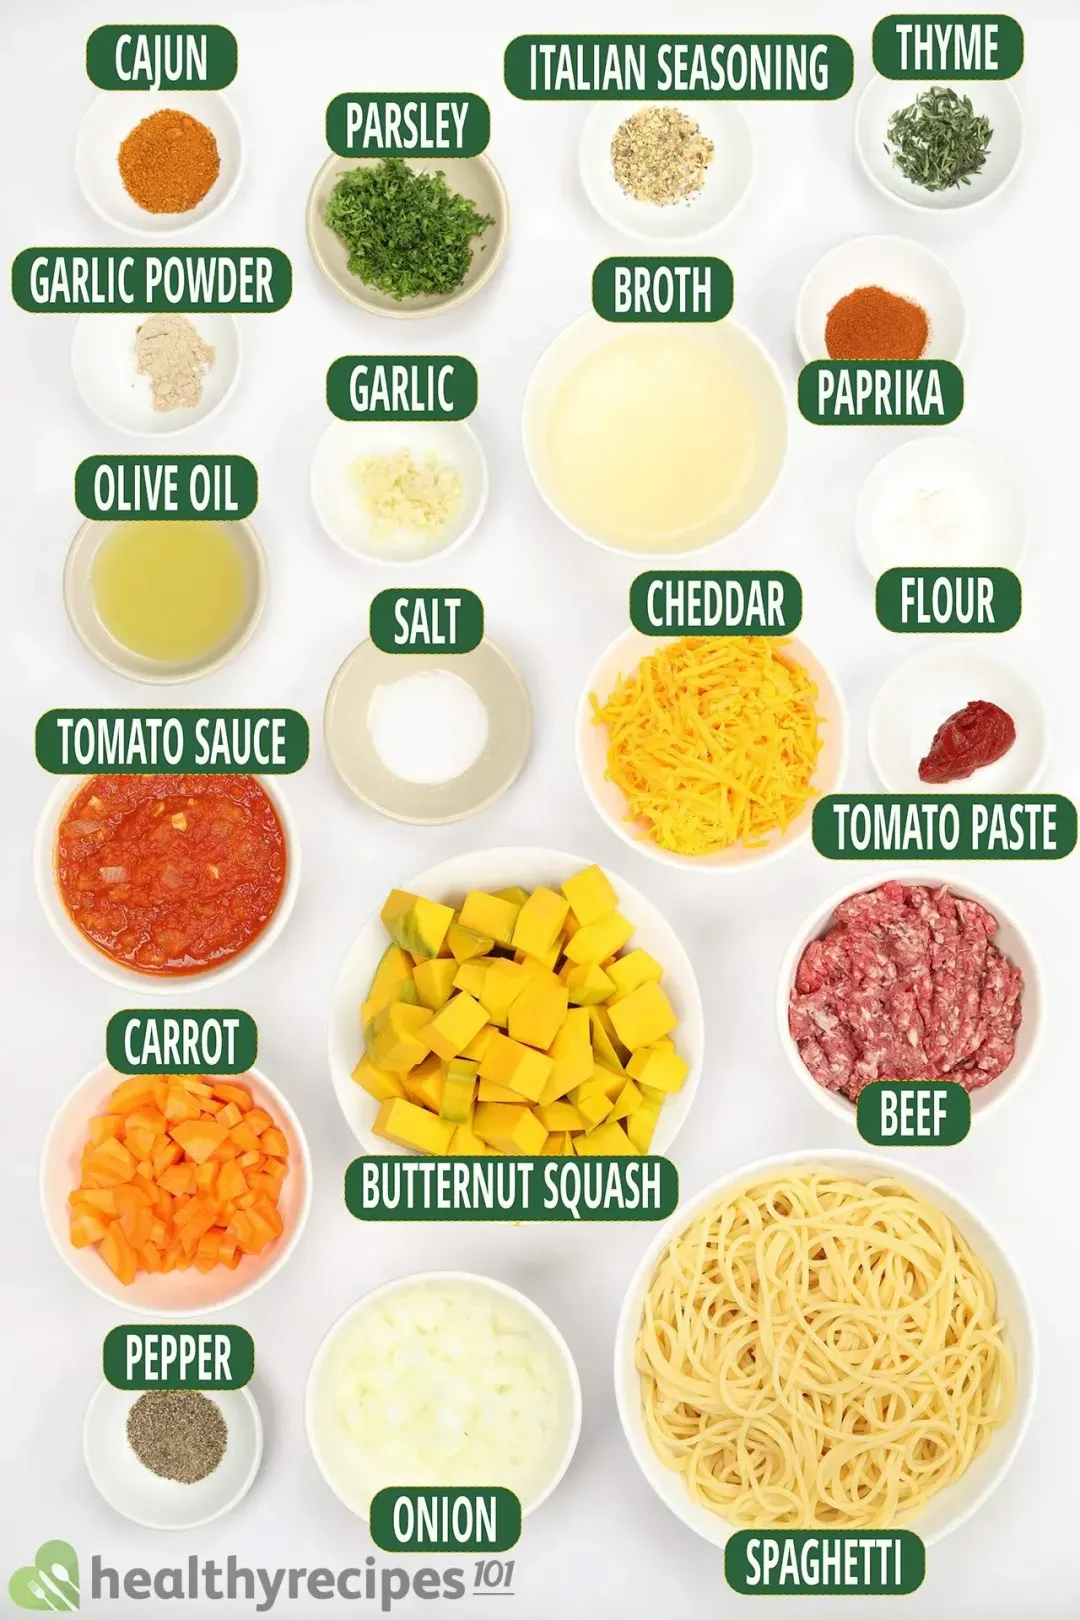 Ingredients for Beefy Butternut Squash Pasta